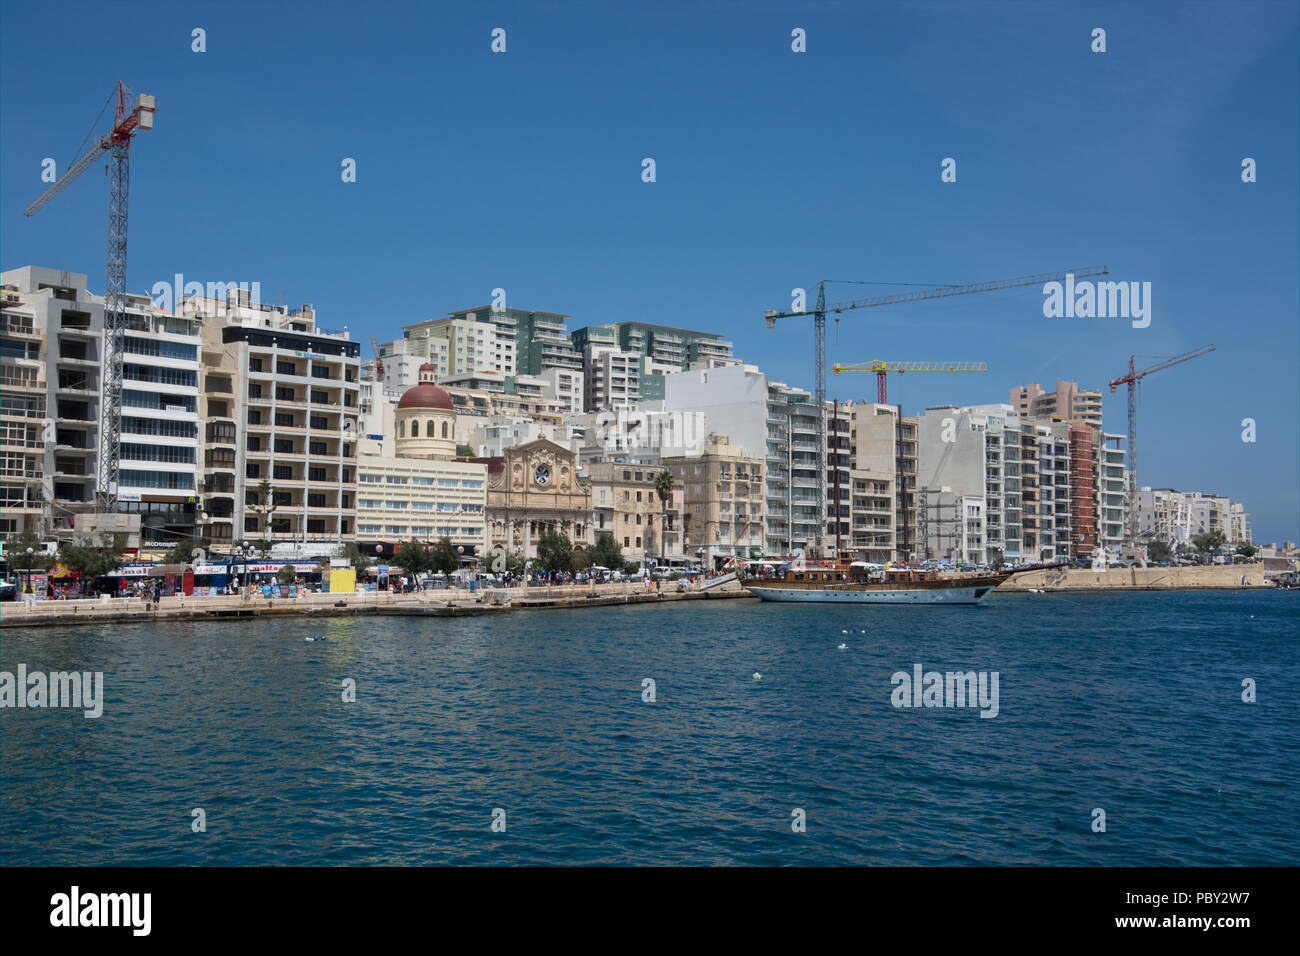 A view of the Sliema waterfront from the ferry travelling between there and Valletta Stock Photo